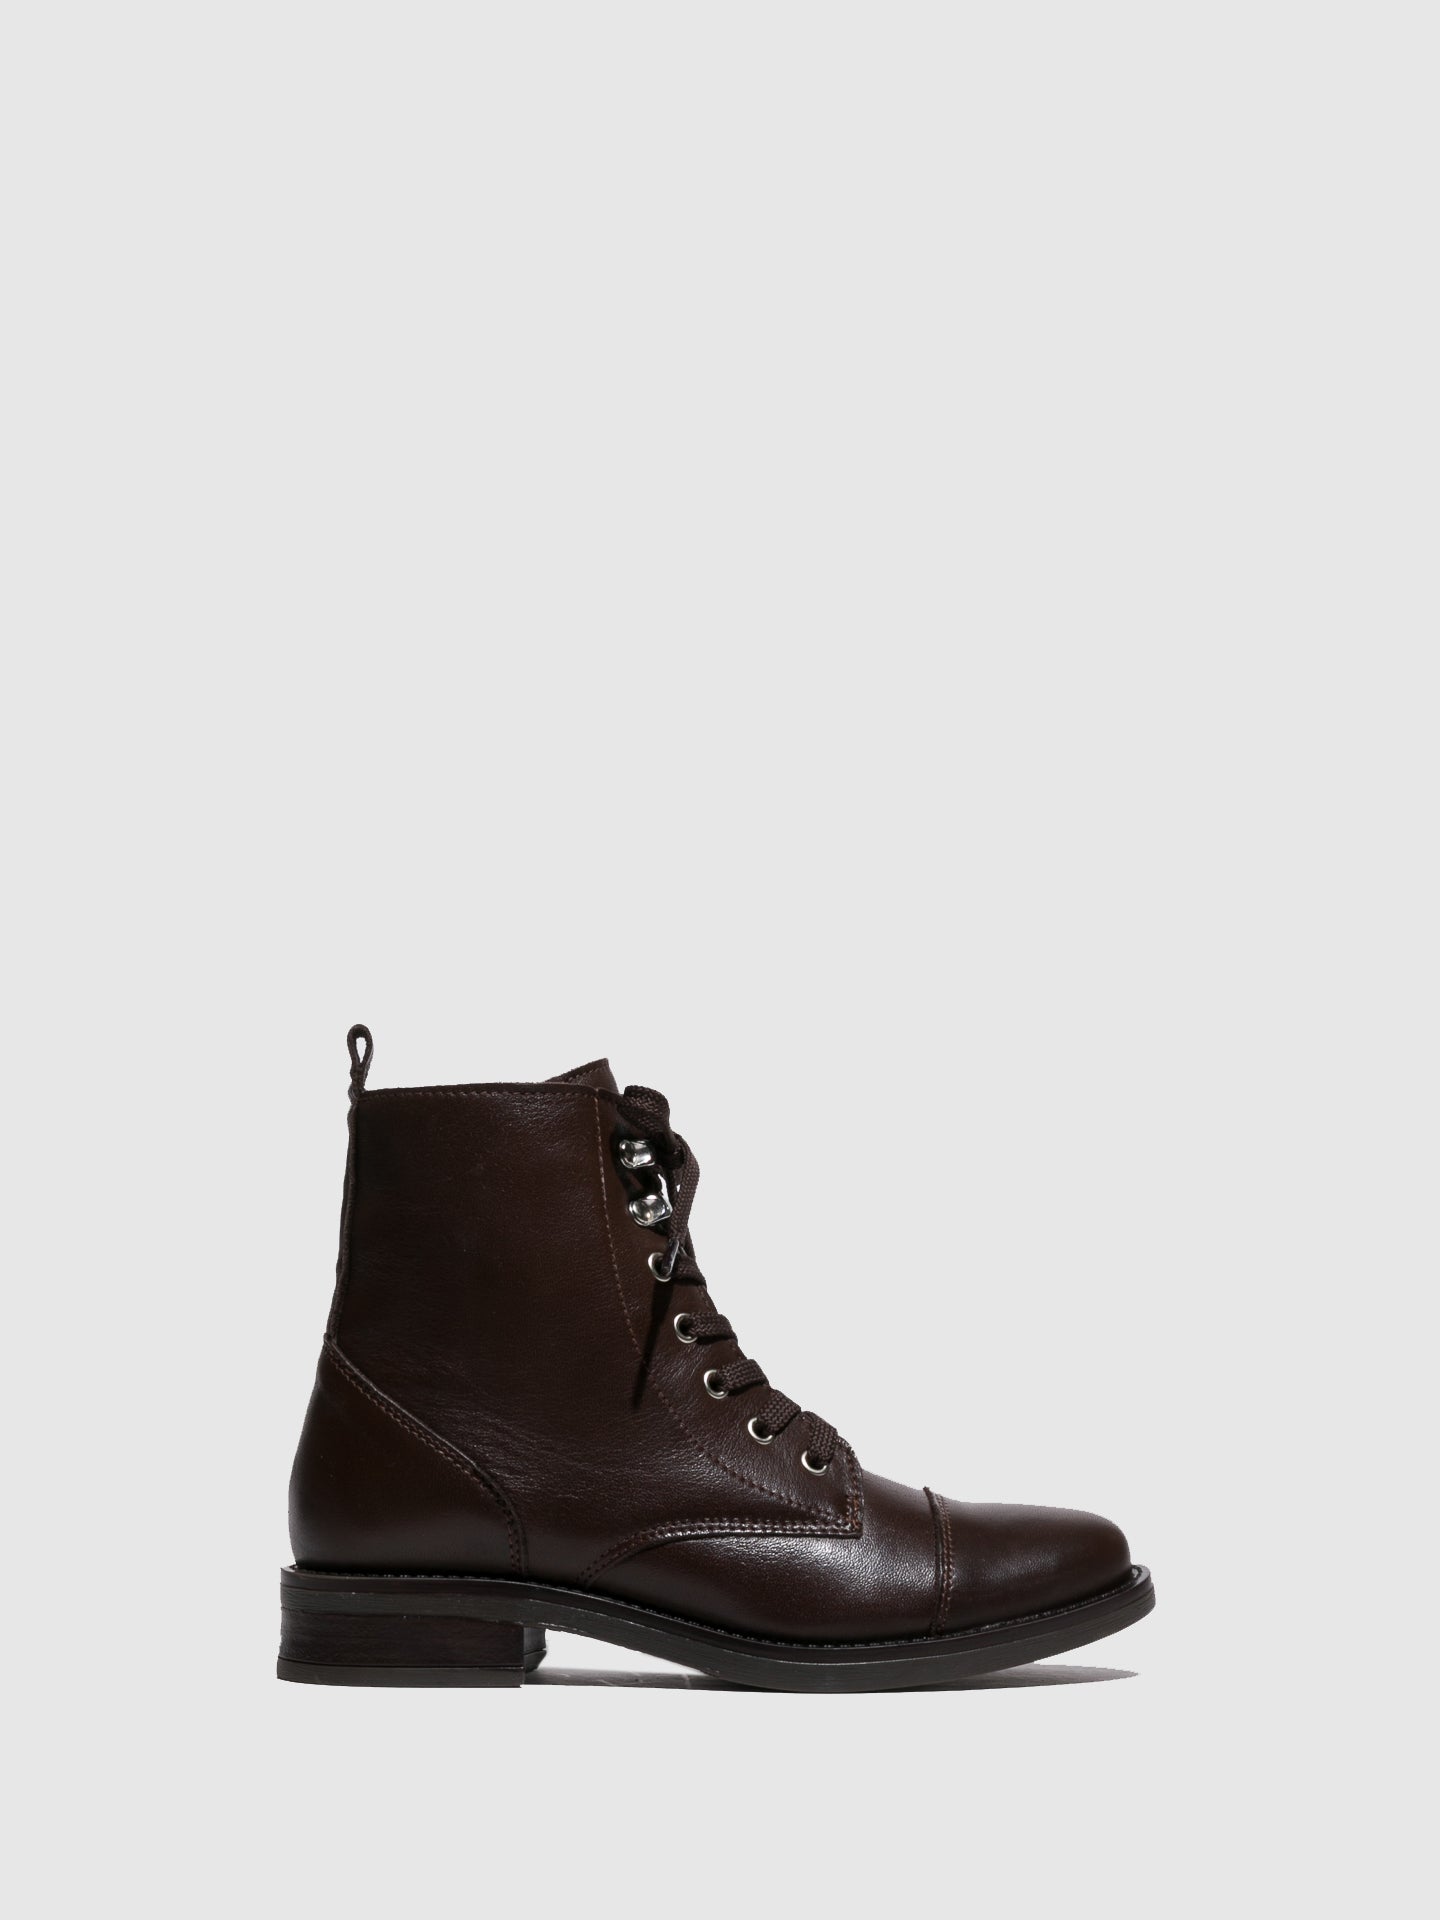 Foreva Brown Lace-up Boots